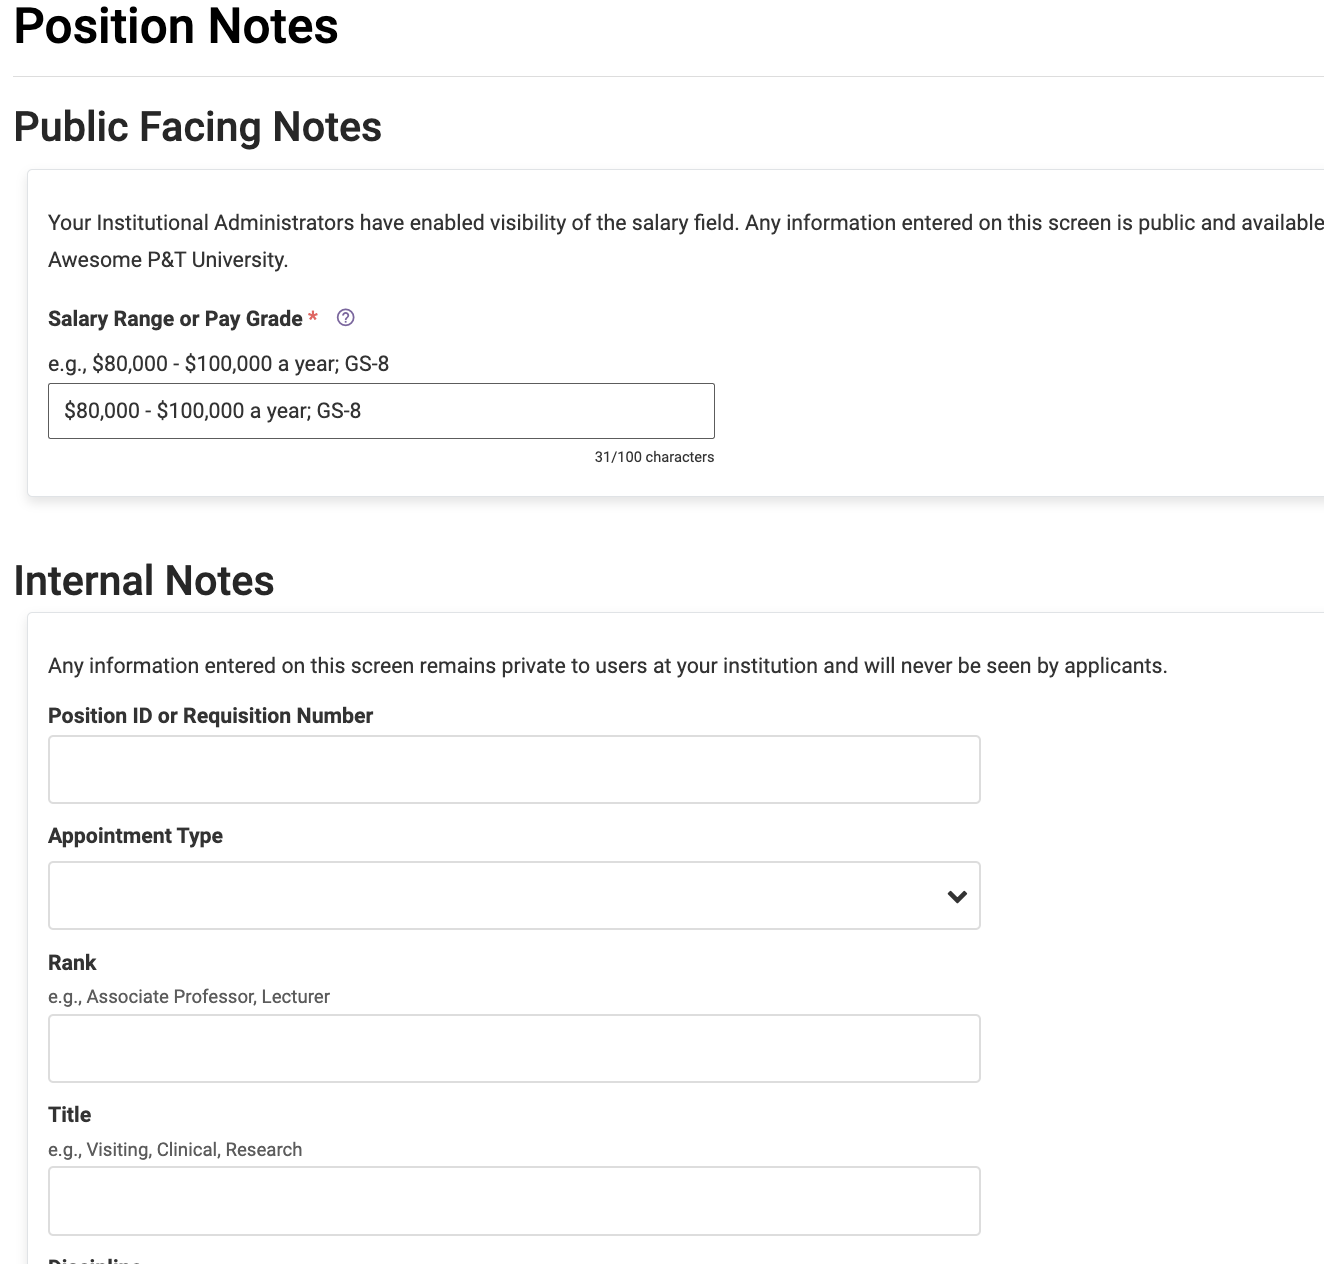 Position Notes will indicate Public Facing Notes available to applicants, versus Internat Notes that remain private. 